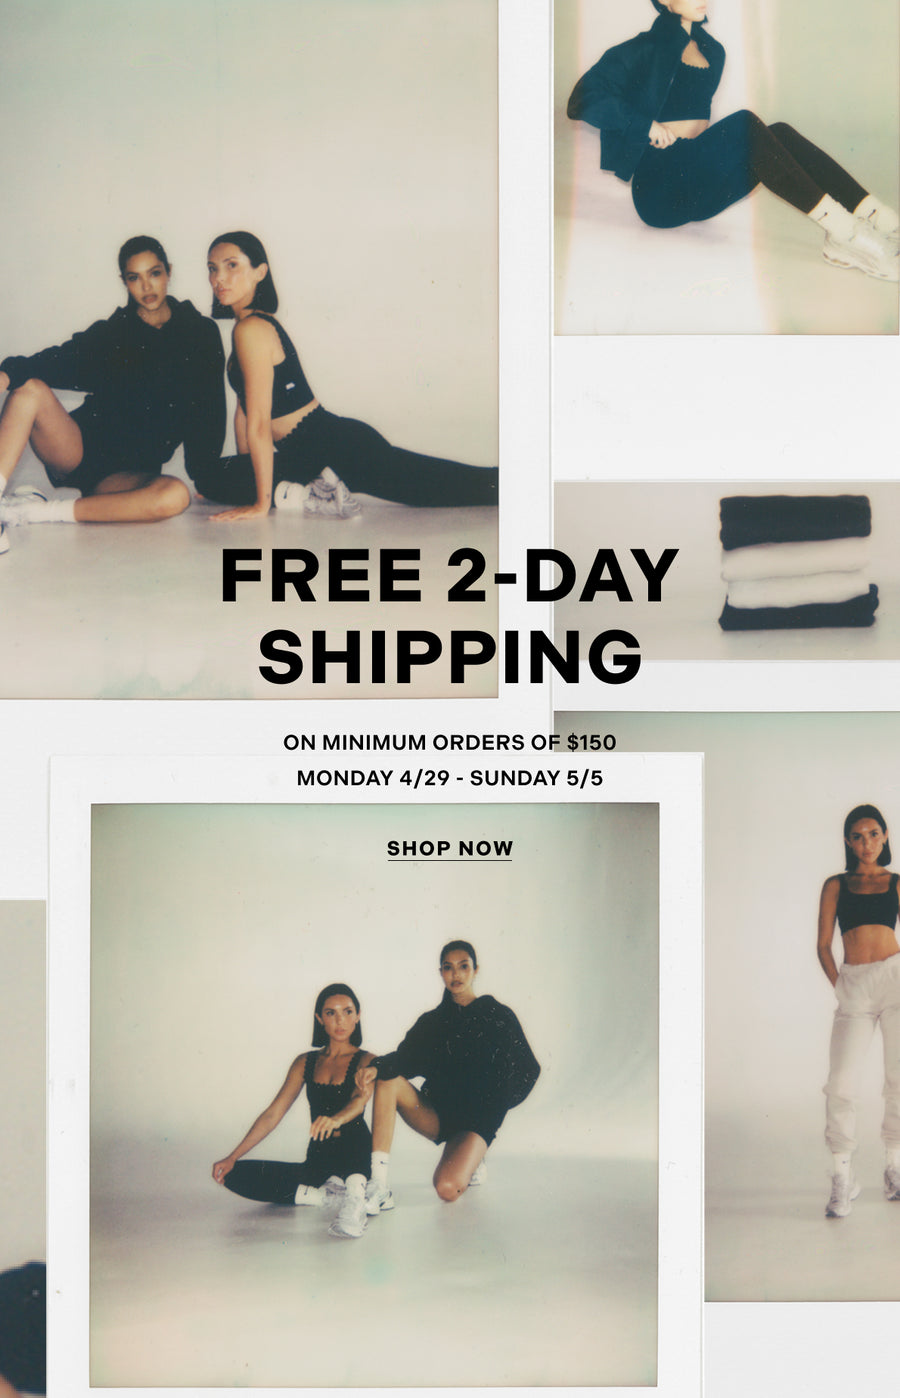 IVL Free 2-Day Shipping